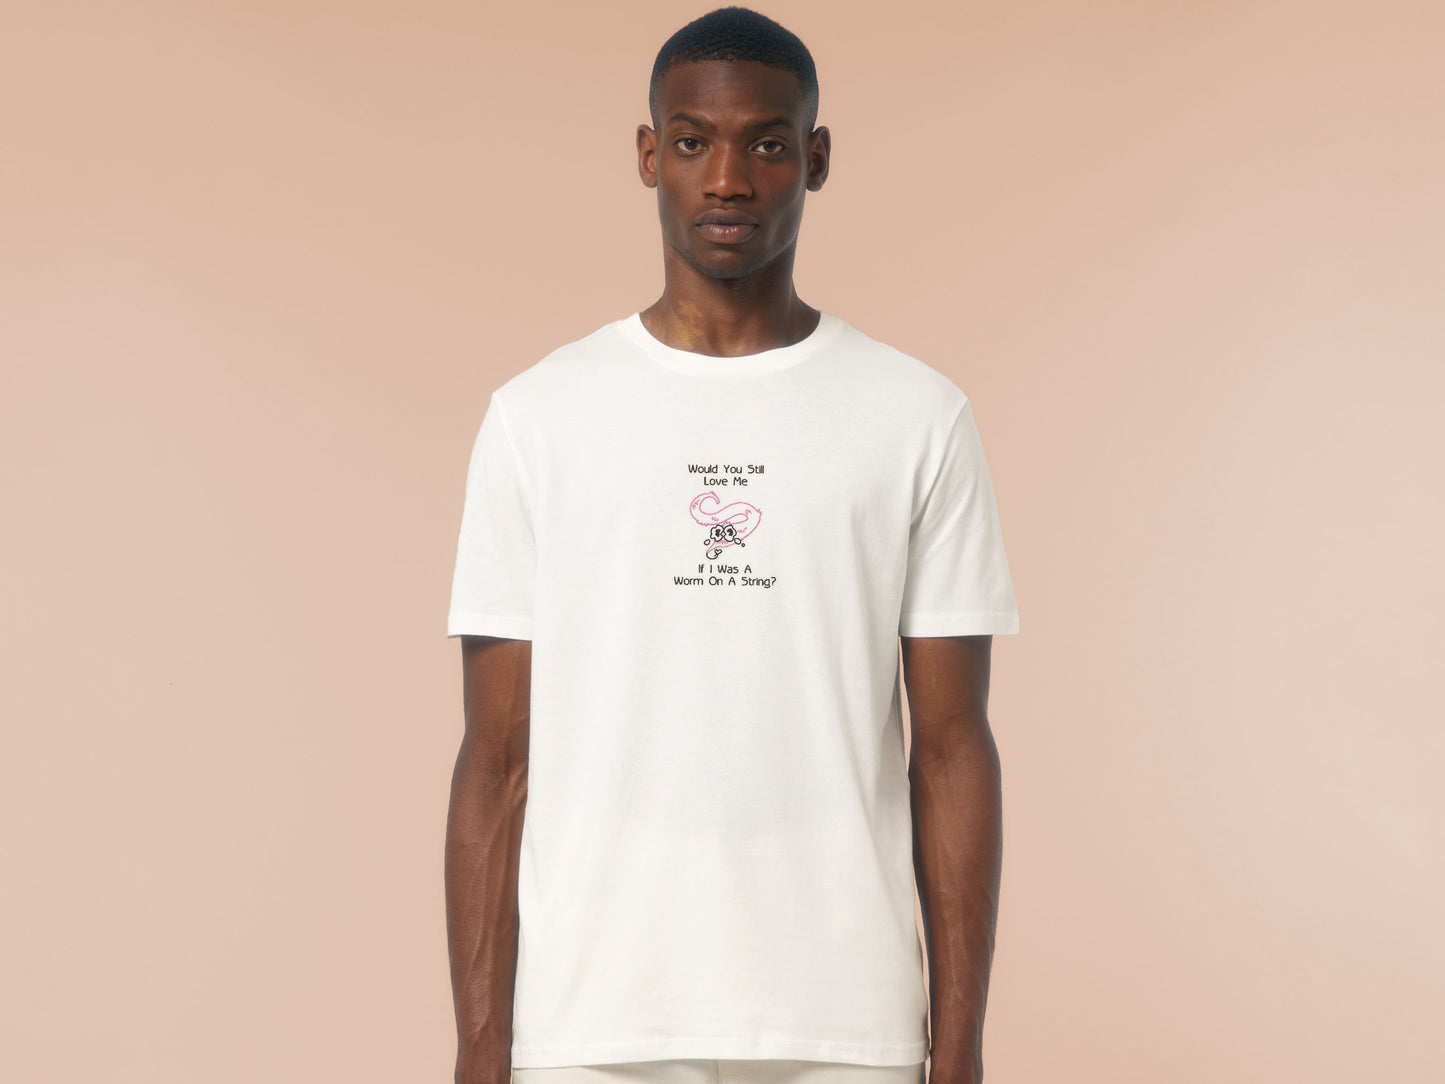 A man wearing an off white short sleeved crew neck t-shirt with an embroidered design of a pink worm on a string with a cute face crying with the black text Would You Still Love Me If I Was A Worm On A String